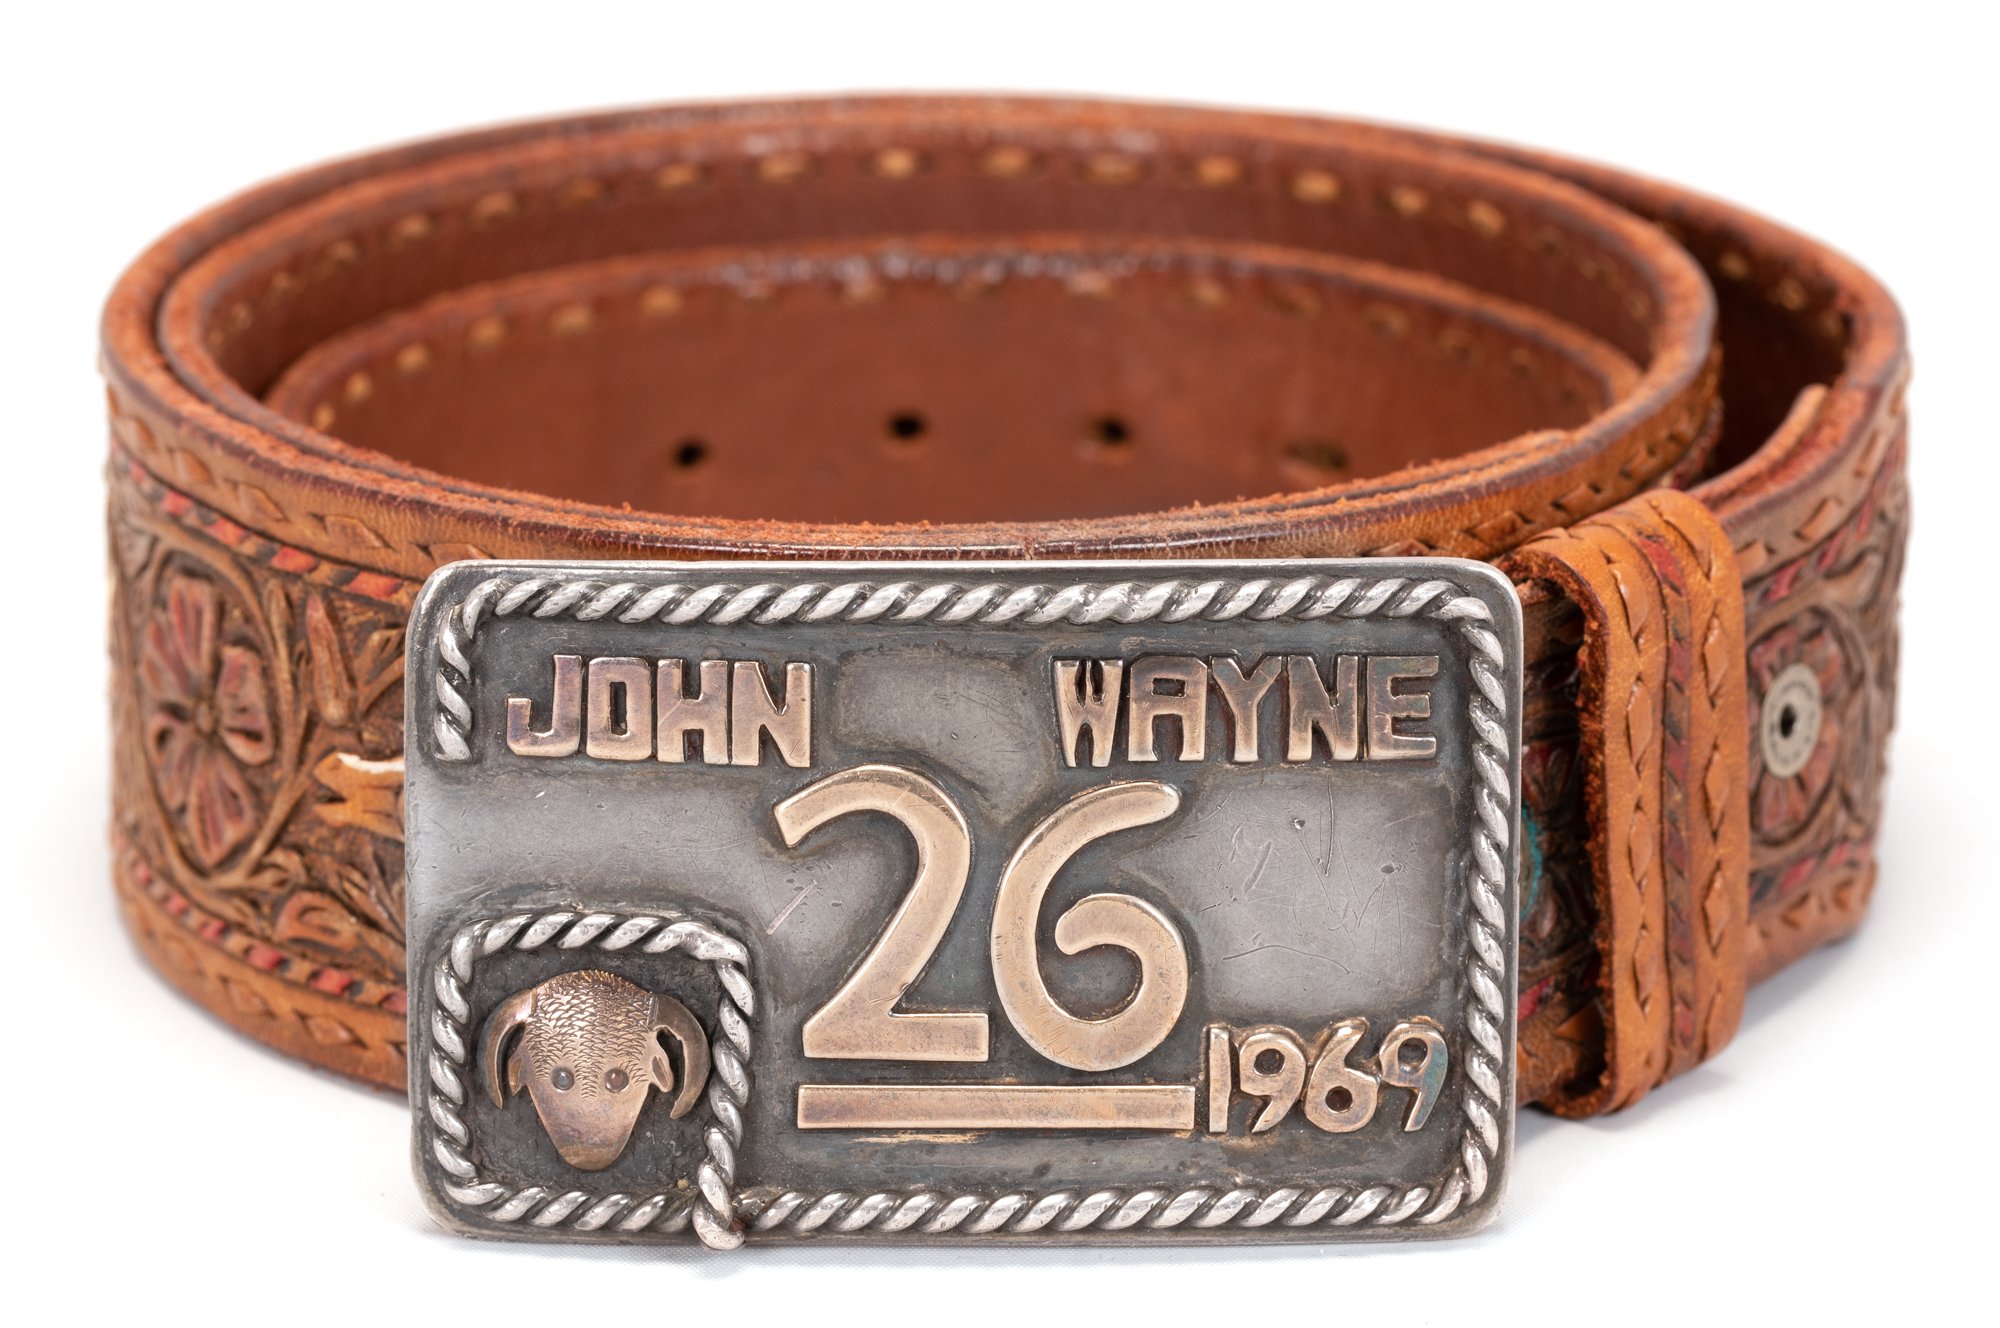 John Wayne 26 Bar Belt Buckle on a Sisco belt presented to him by Ronald  Reagan. — Old West Events